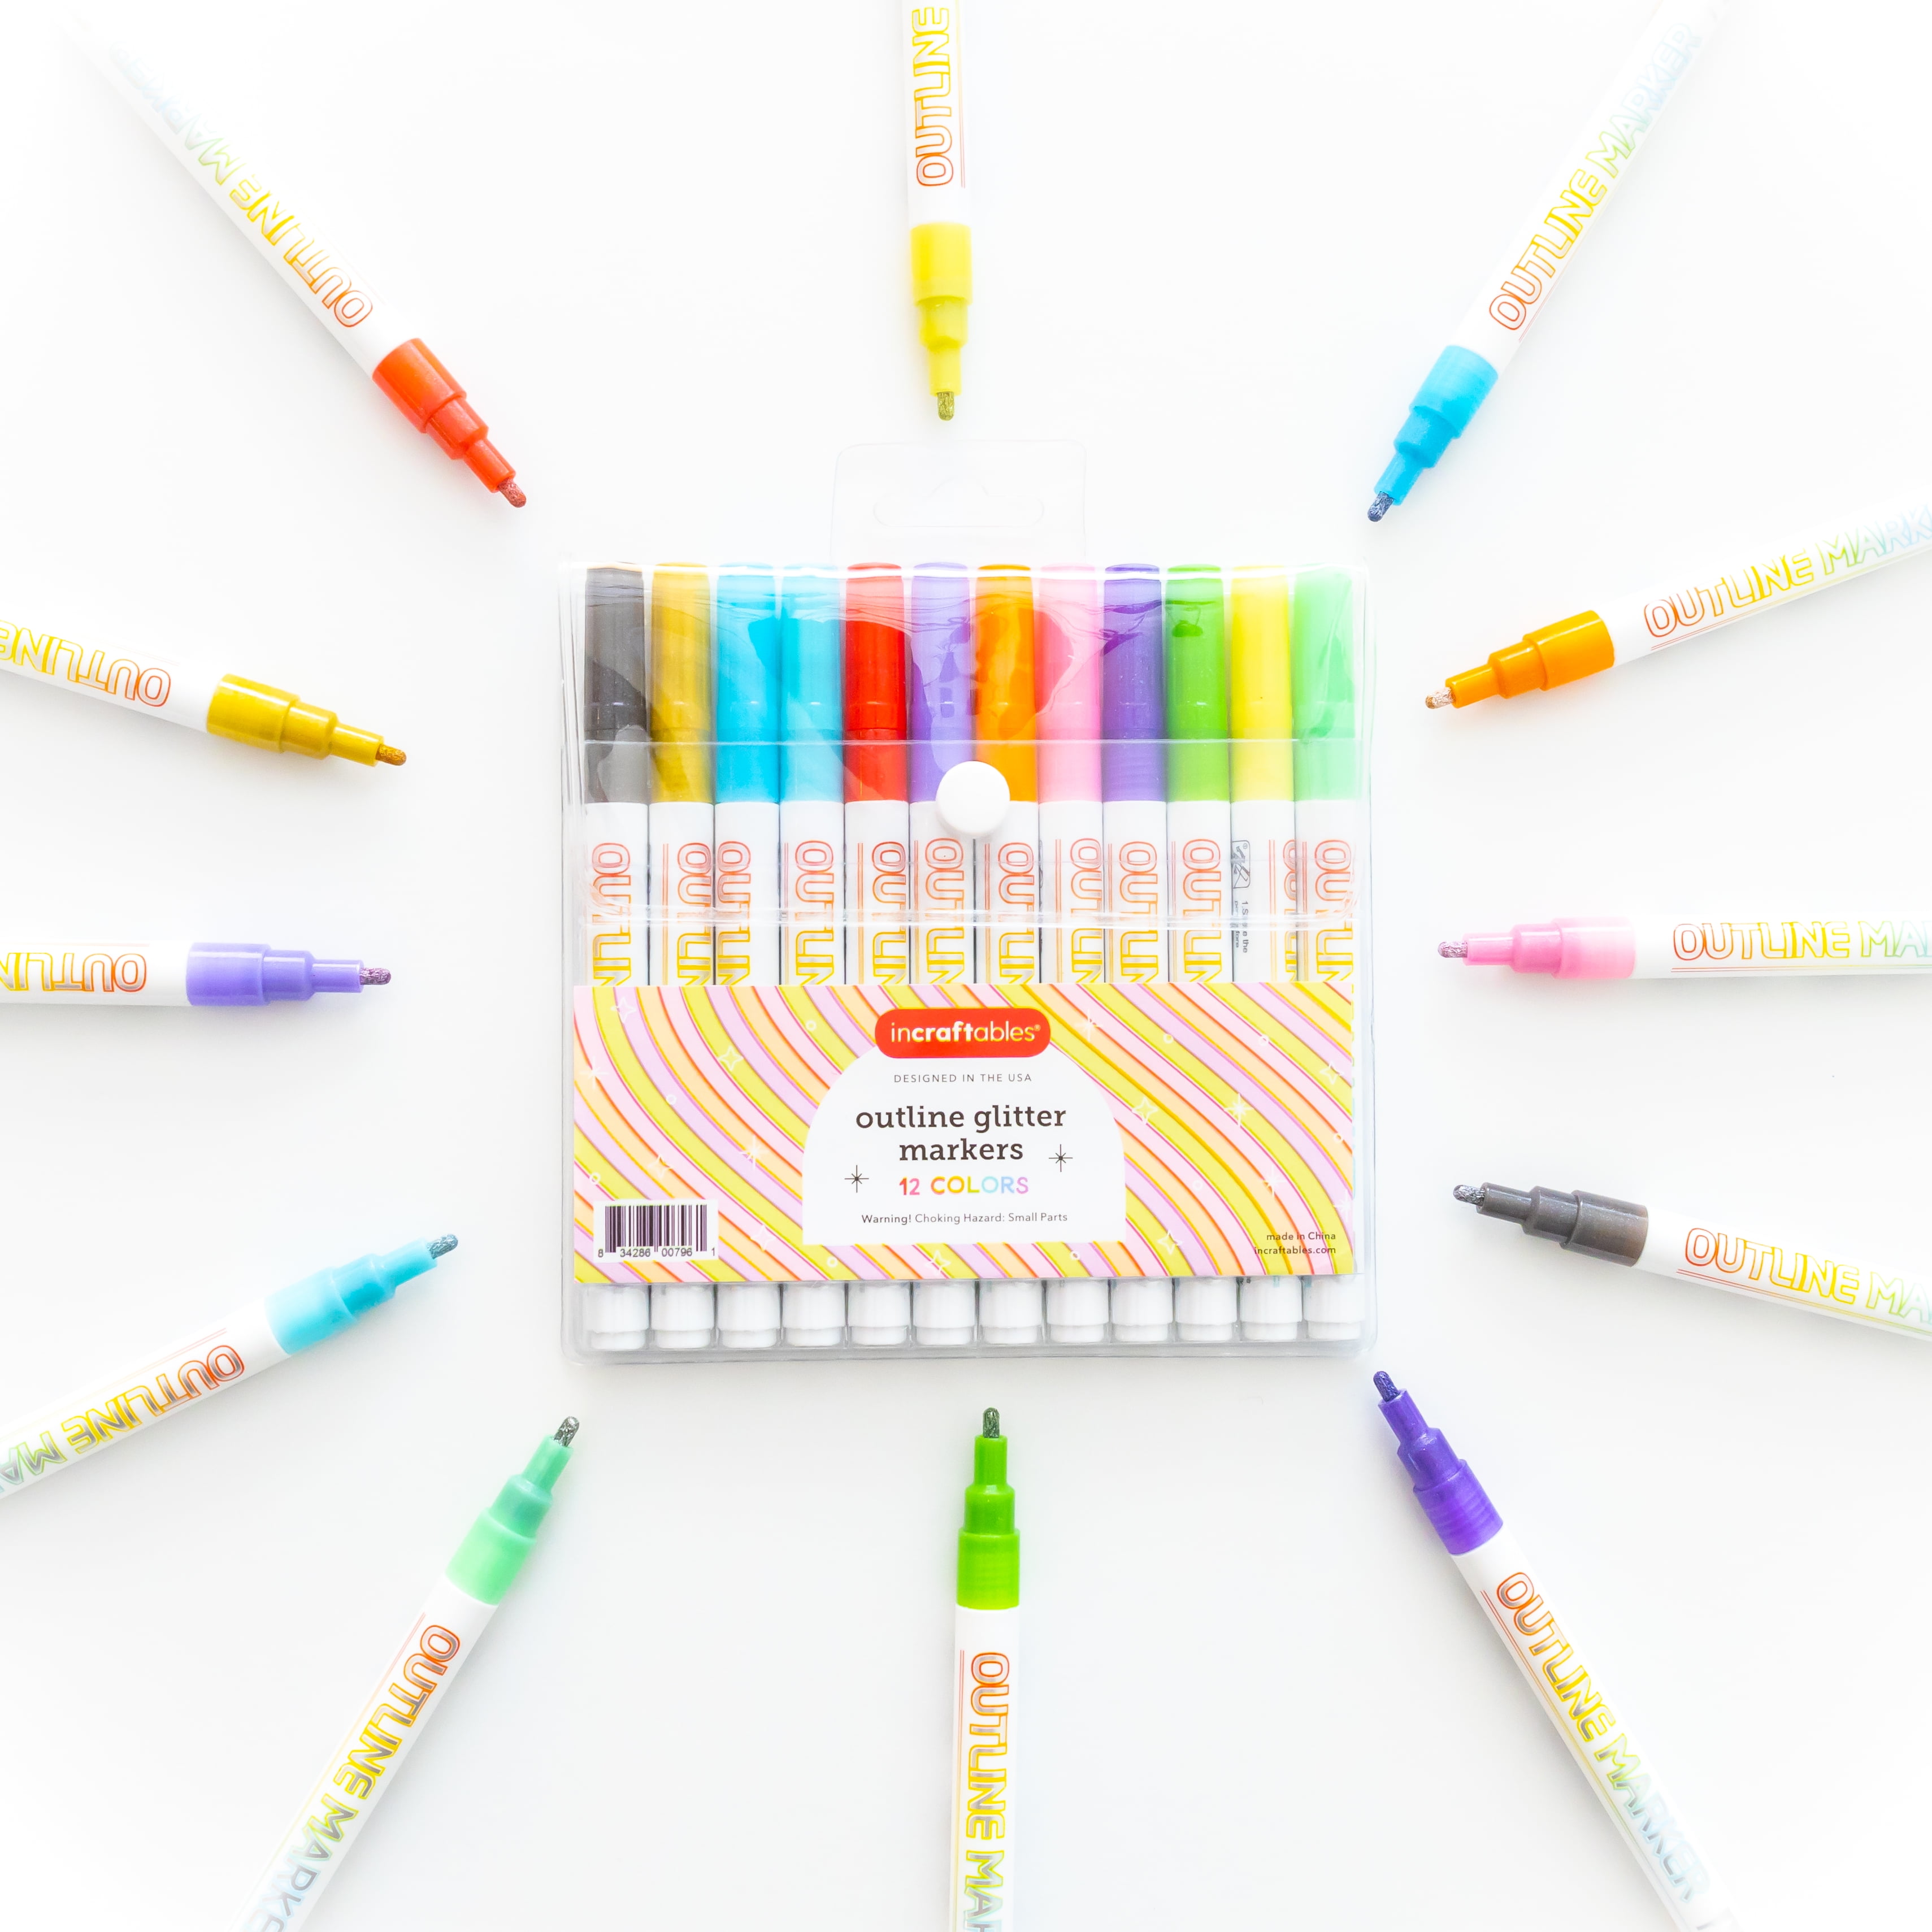 Best Fabric Markers Pack of 24 Pens Non-Toxic - Set of 24 Individual Colors - No